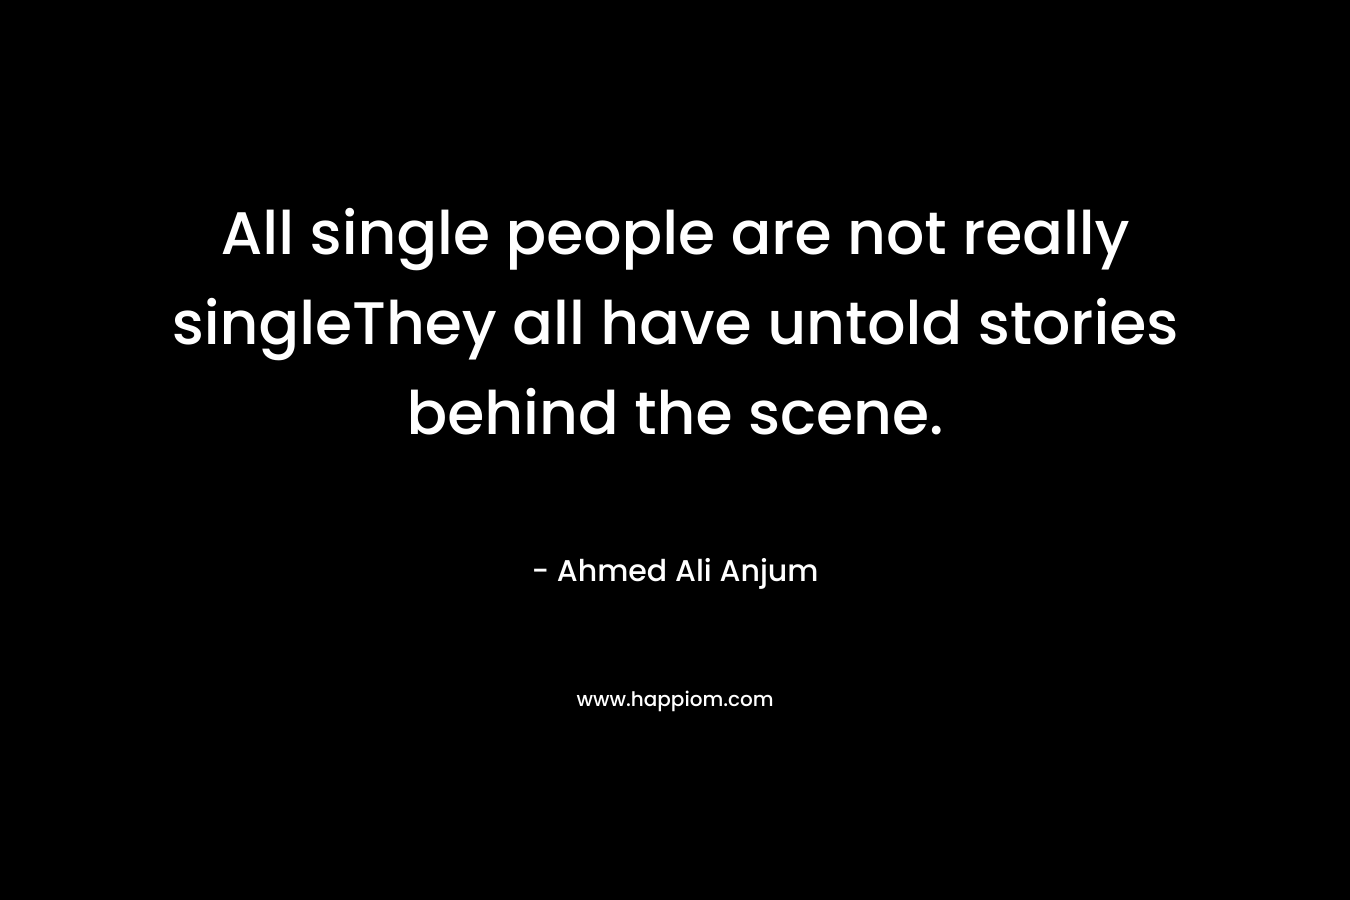 All single people are not really singleThey all have untold stories behind the scene. – Ahmed Ali Anjum